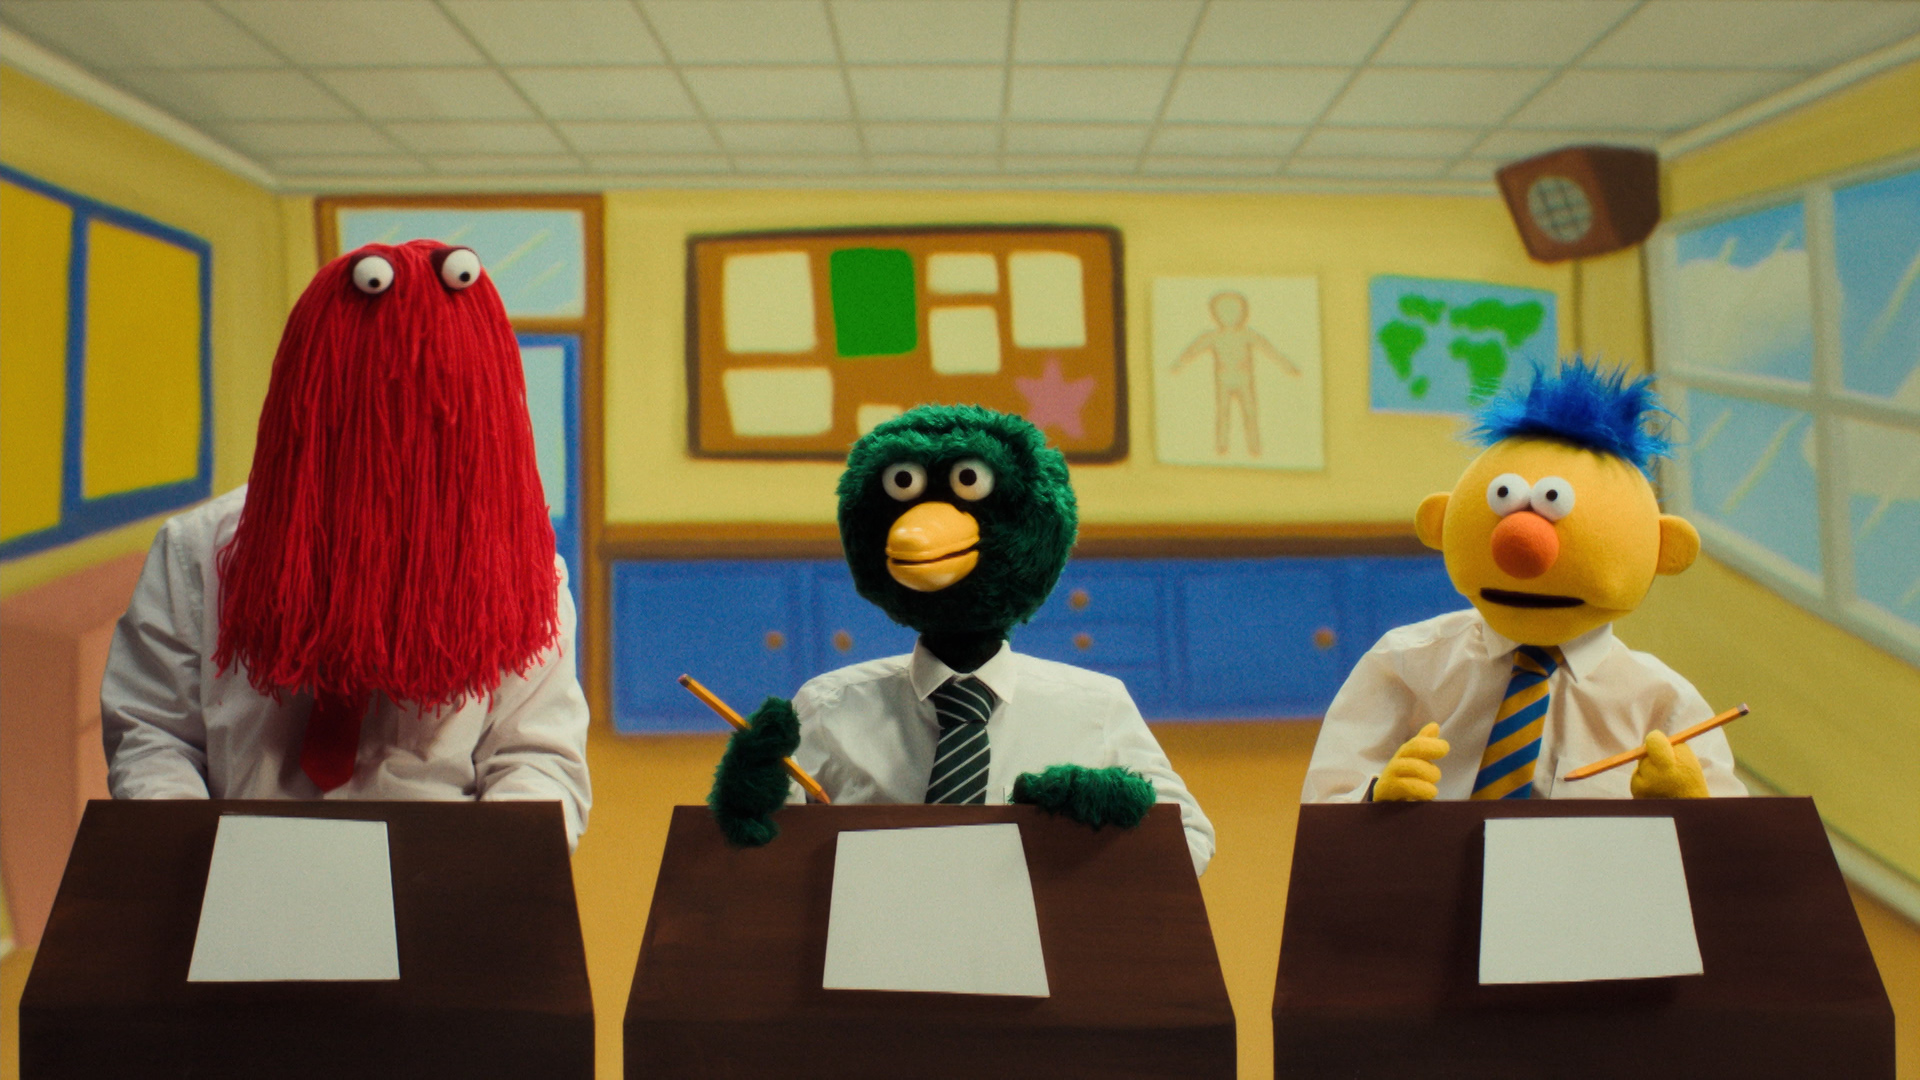 Red Guy, Duck and Yellow Guy at school in the new series of ’Don’t Hug Me I’m Scared’ on Channel 4